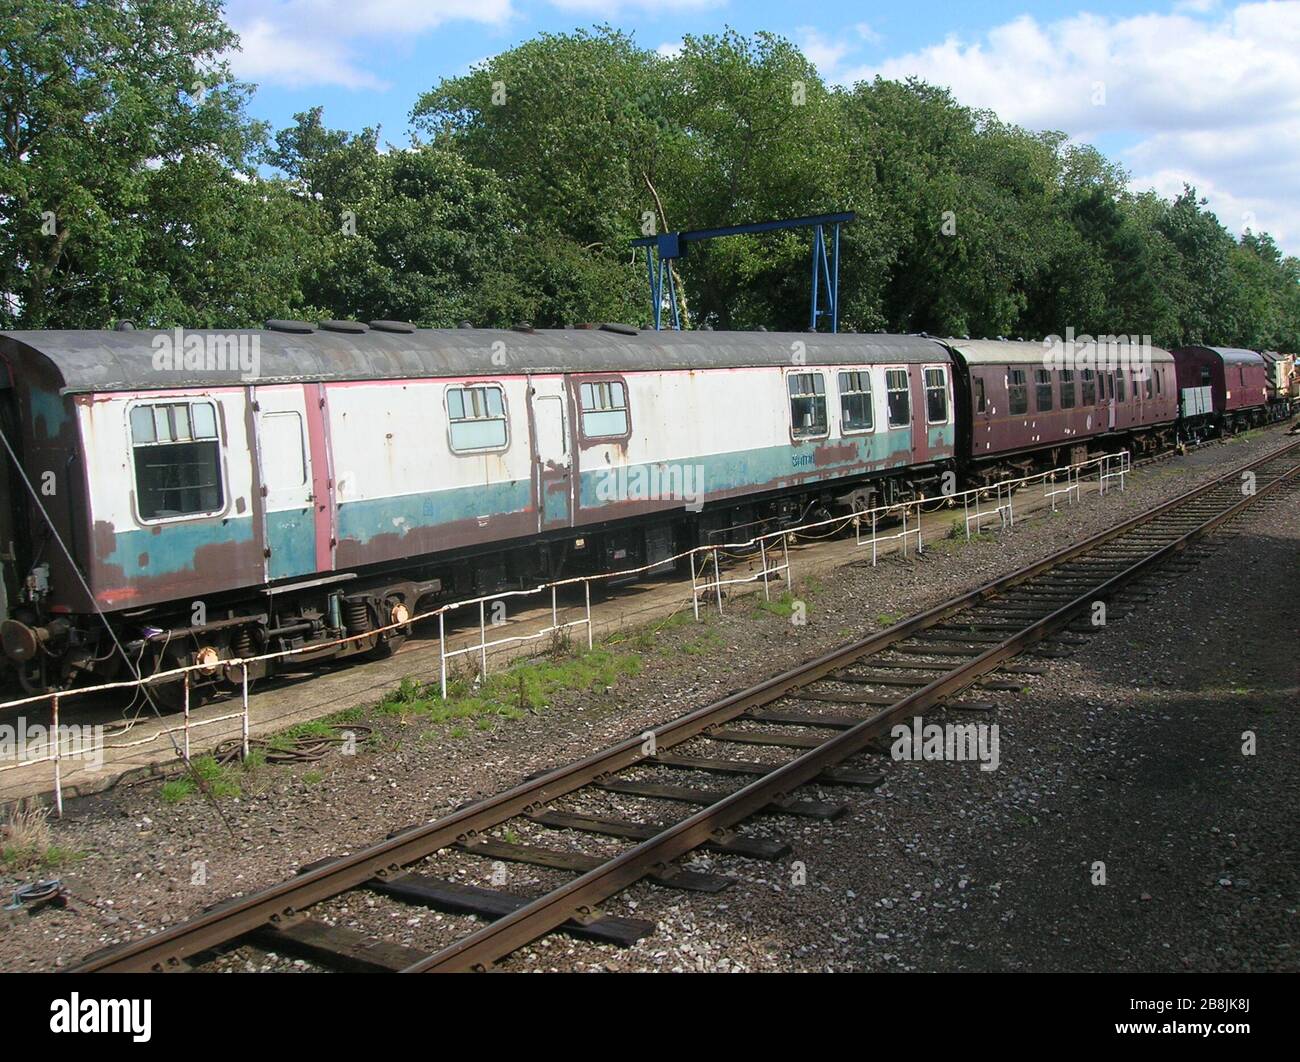 'English: This picture shows two coaches on the Great Central. On the left is a RBR in blue/grey livery, and the one on the right is a brake coach in maroon.; 30 August 2009 (original upload date); Transferred from en.wikipedia to Commons by Oxyman using CommonsHelper.; DuchessofSutherland at English Wikipedia; ' Stock Photo